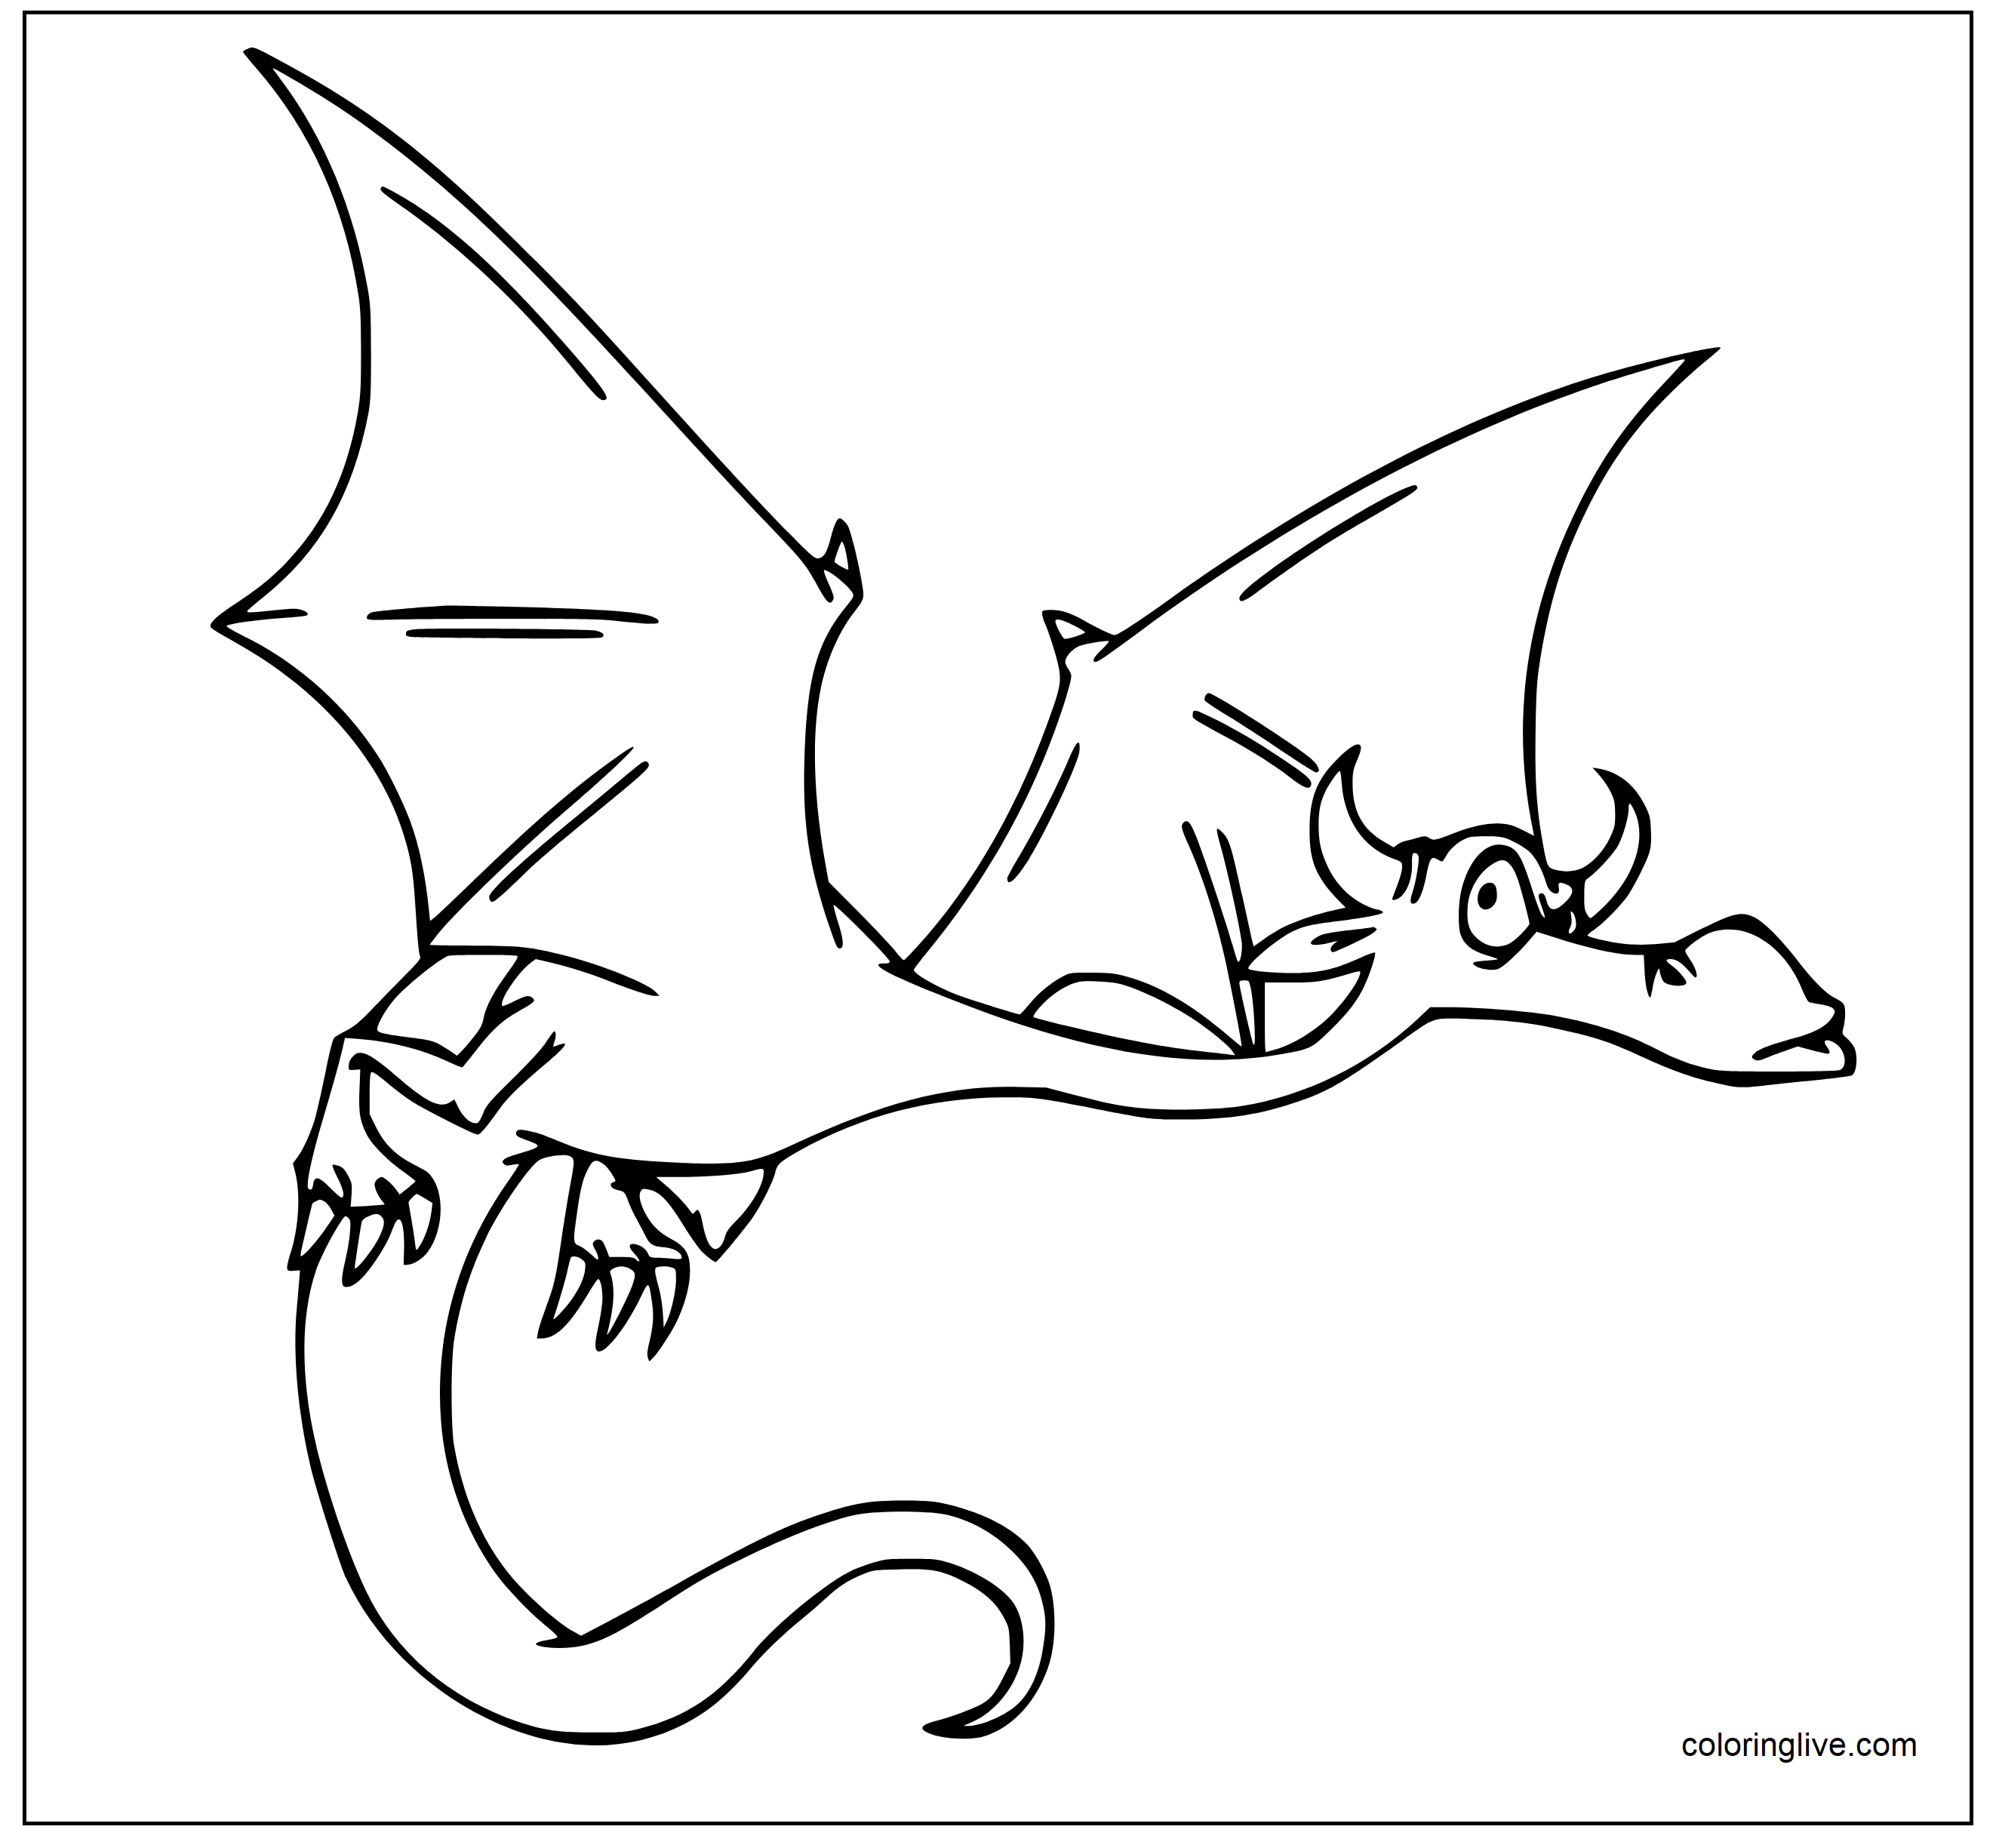 Printable Flying dragon like a bat Coloring Page for kids.